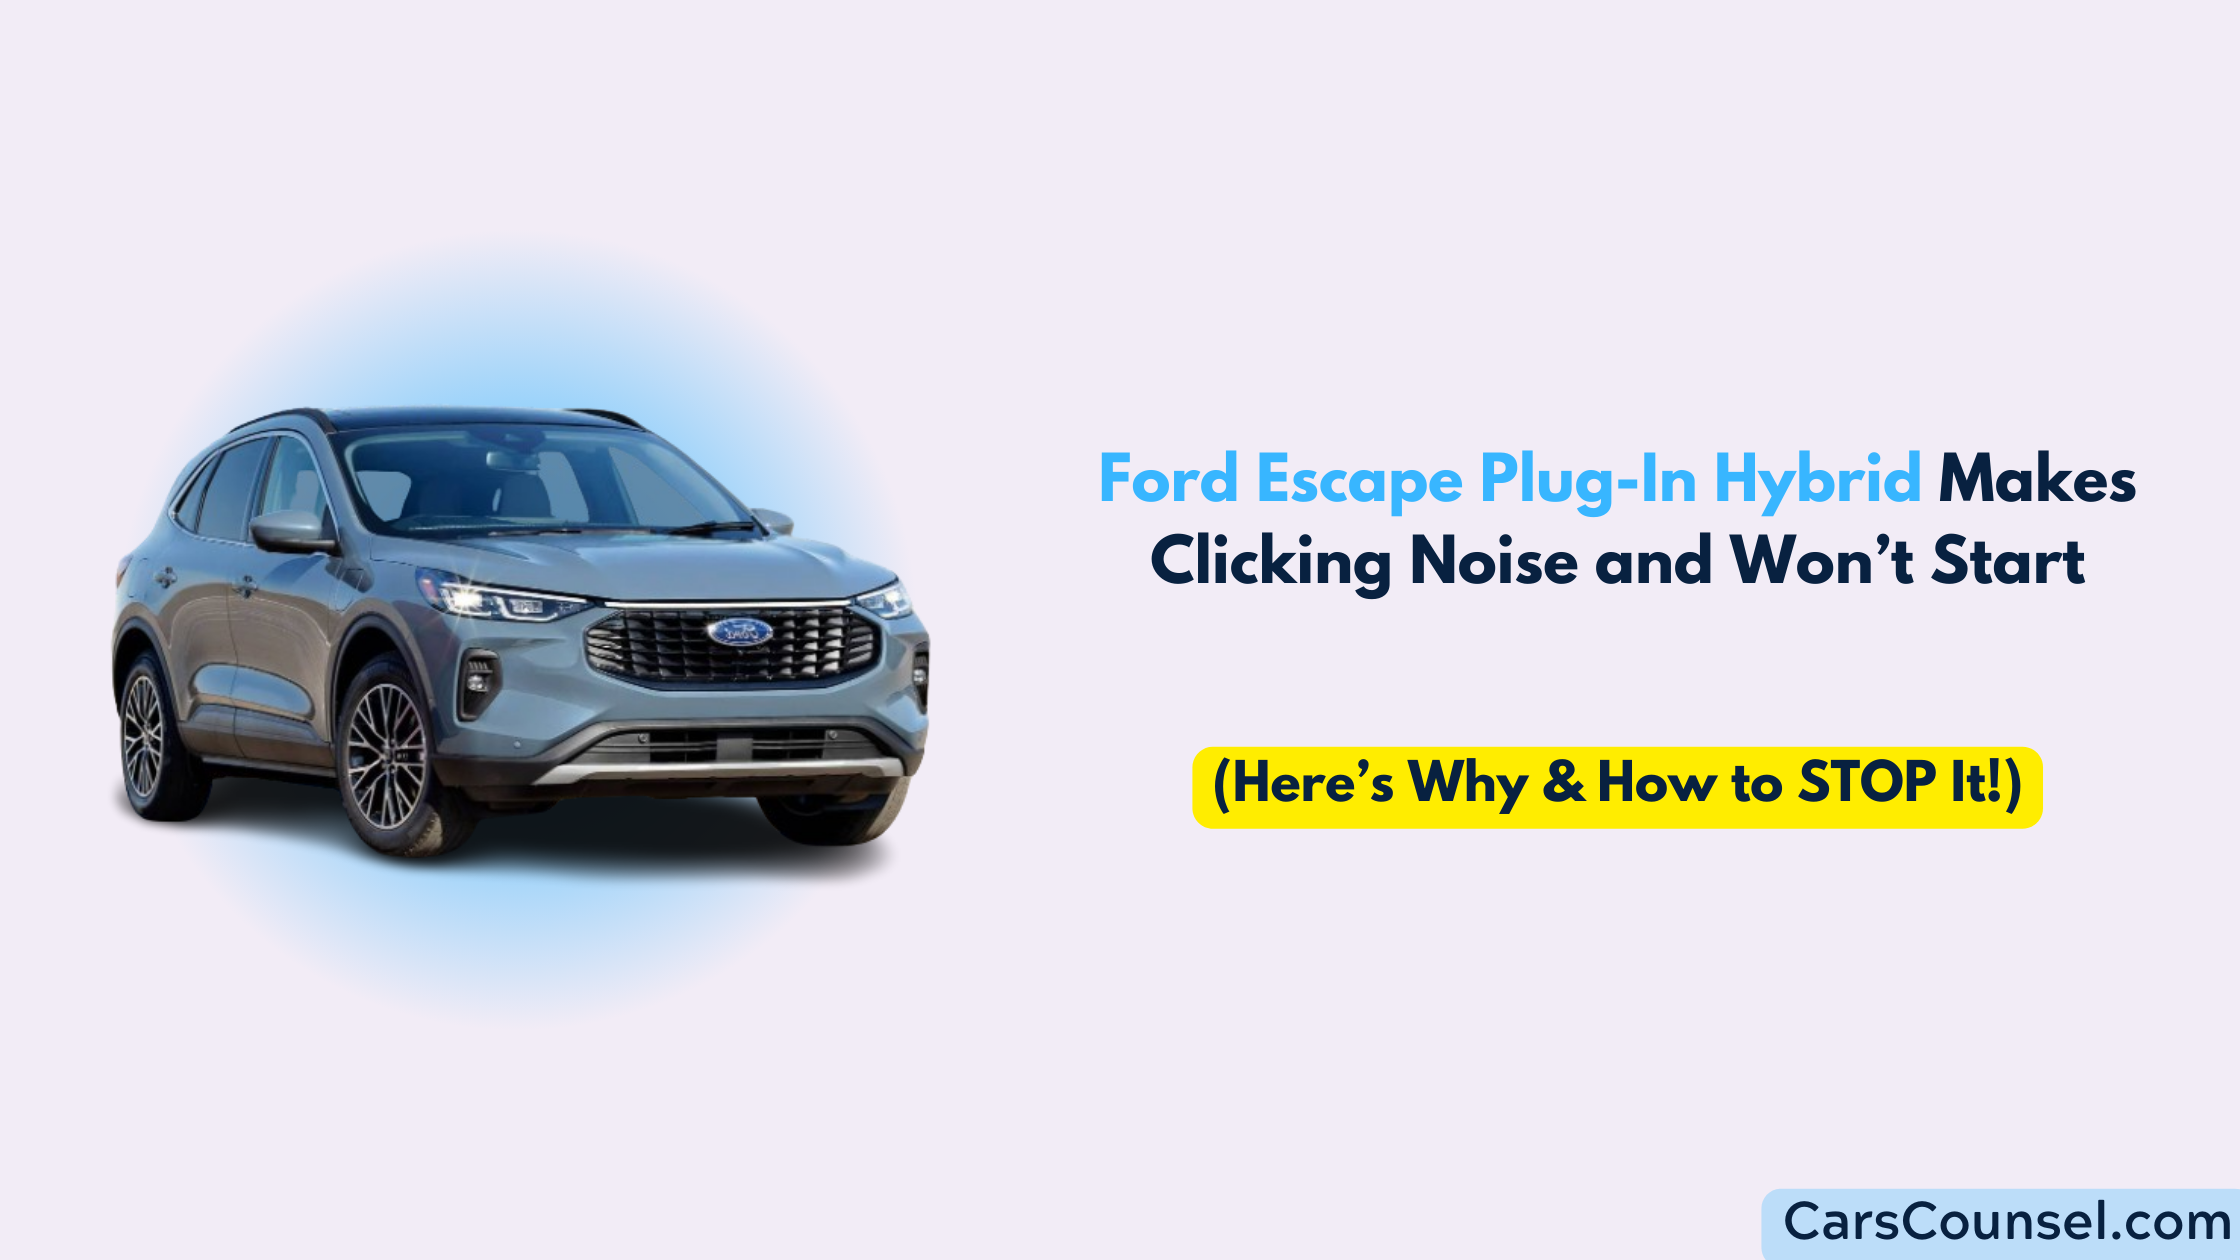 Ford Escape Plug In Hybrid Clicking Noise And Won’t Start